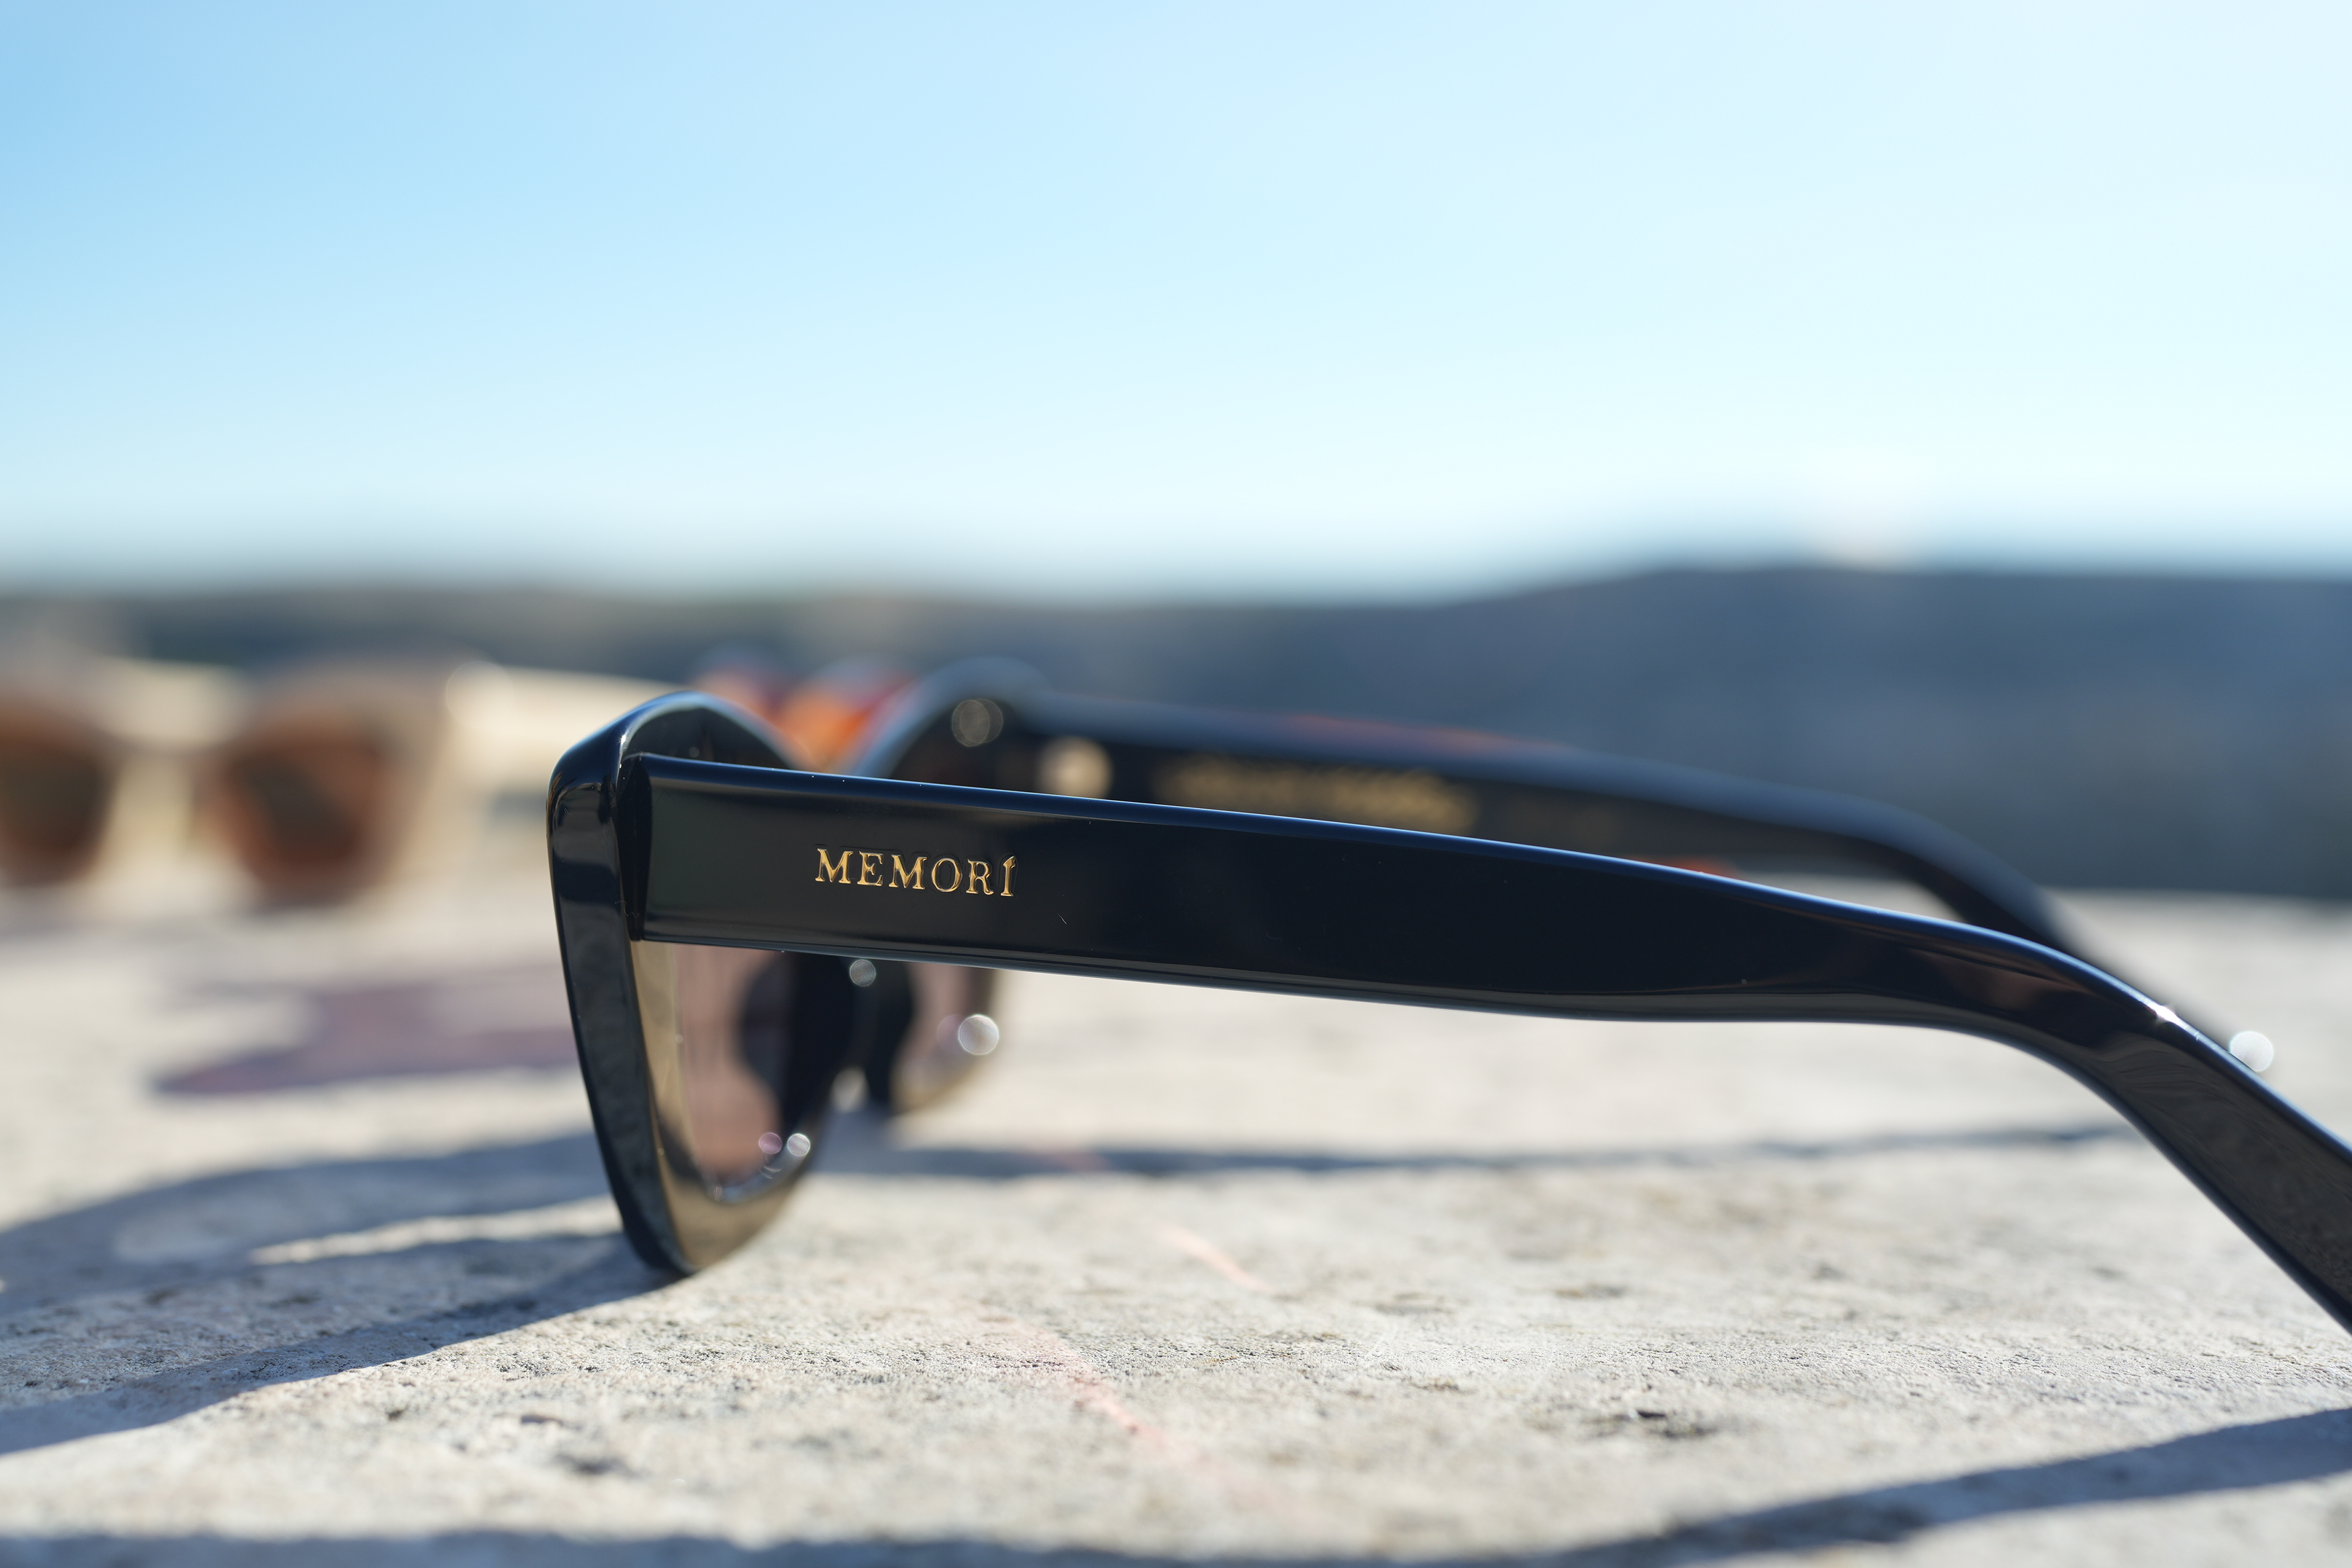 Memorí Italian cat eye sunglasses for small faces, close up image showing the Memorí logo in hold on the external temple arm.